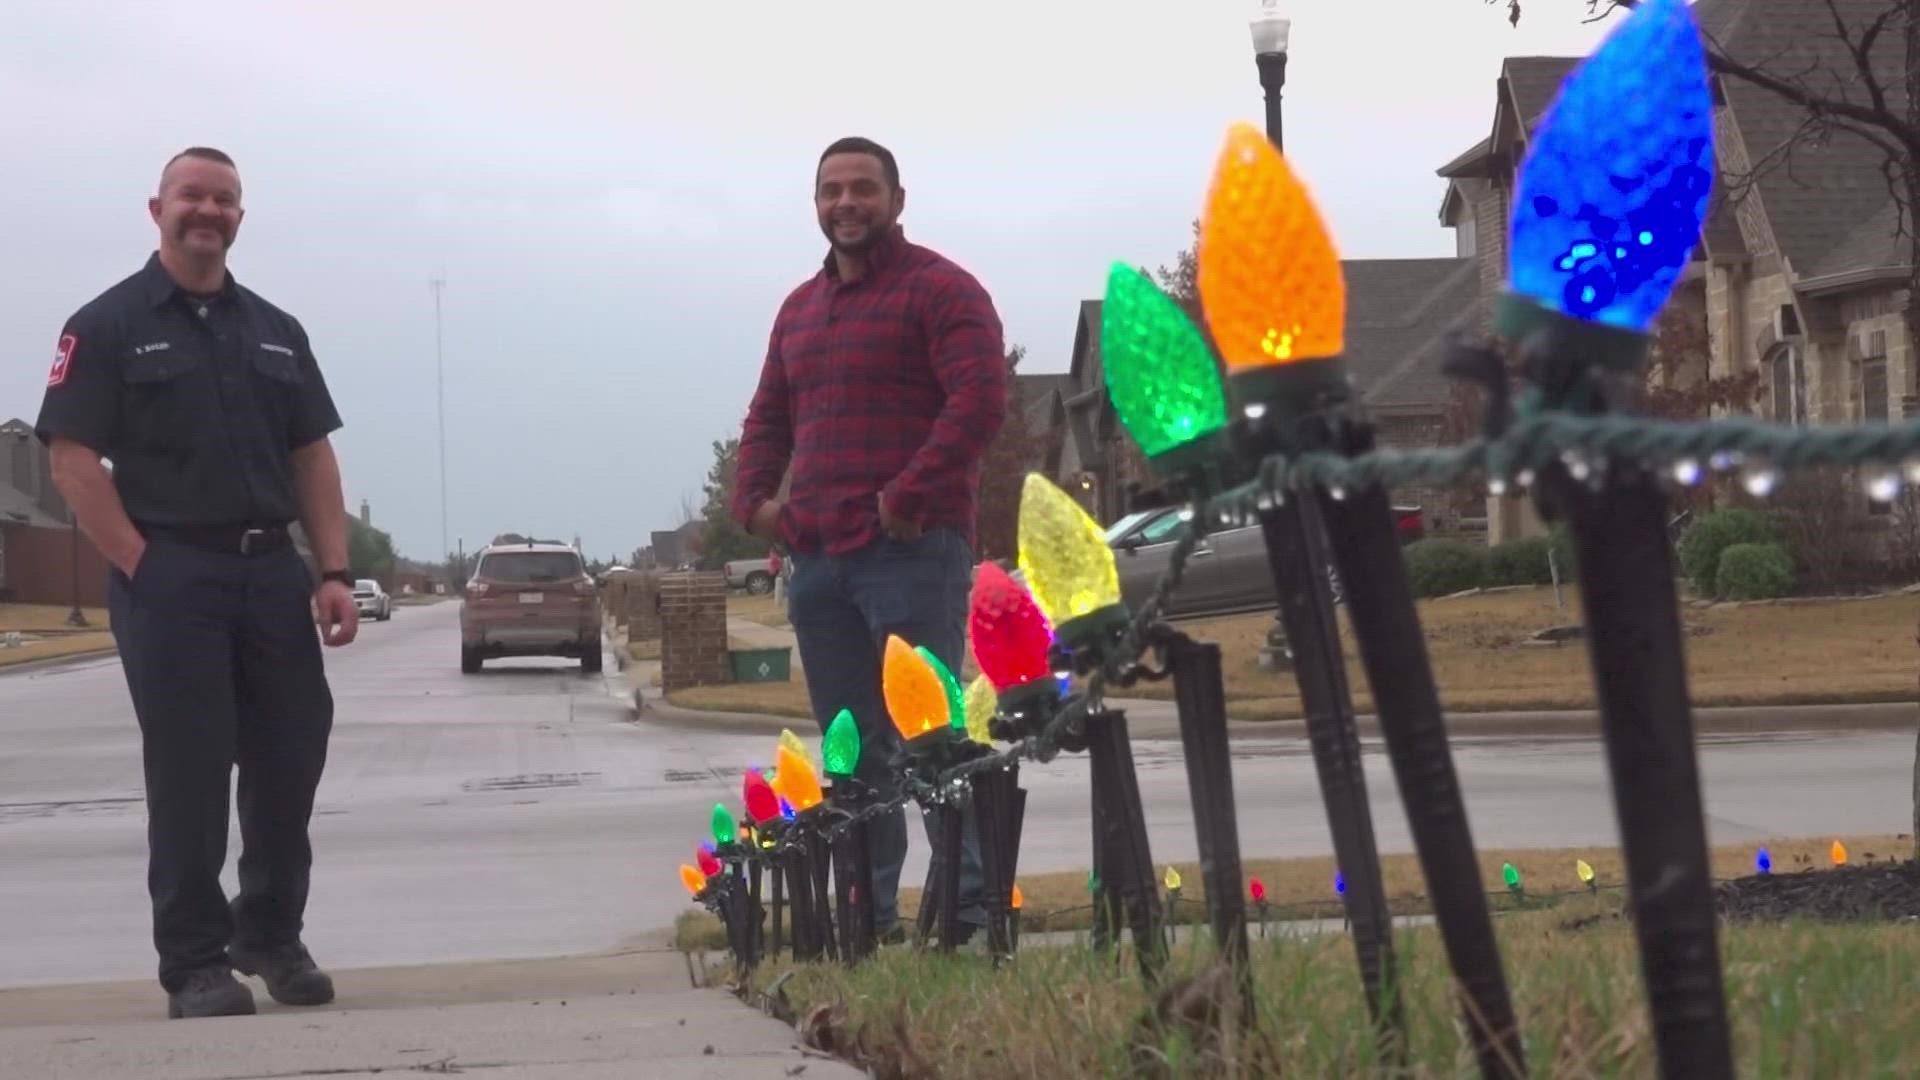 Rafael Martinez was worried he wouldn't be able to finish decorating for Christmas.